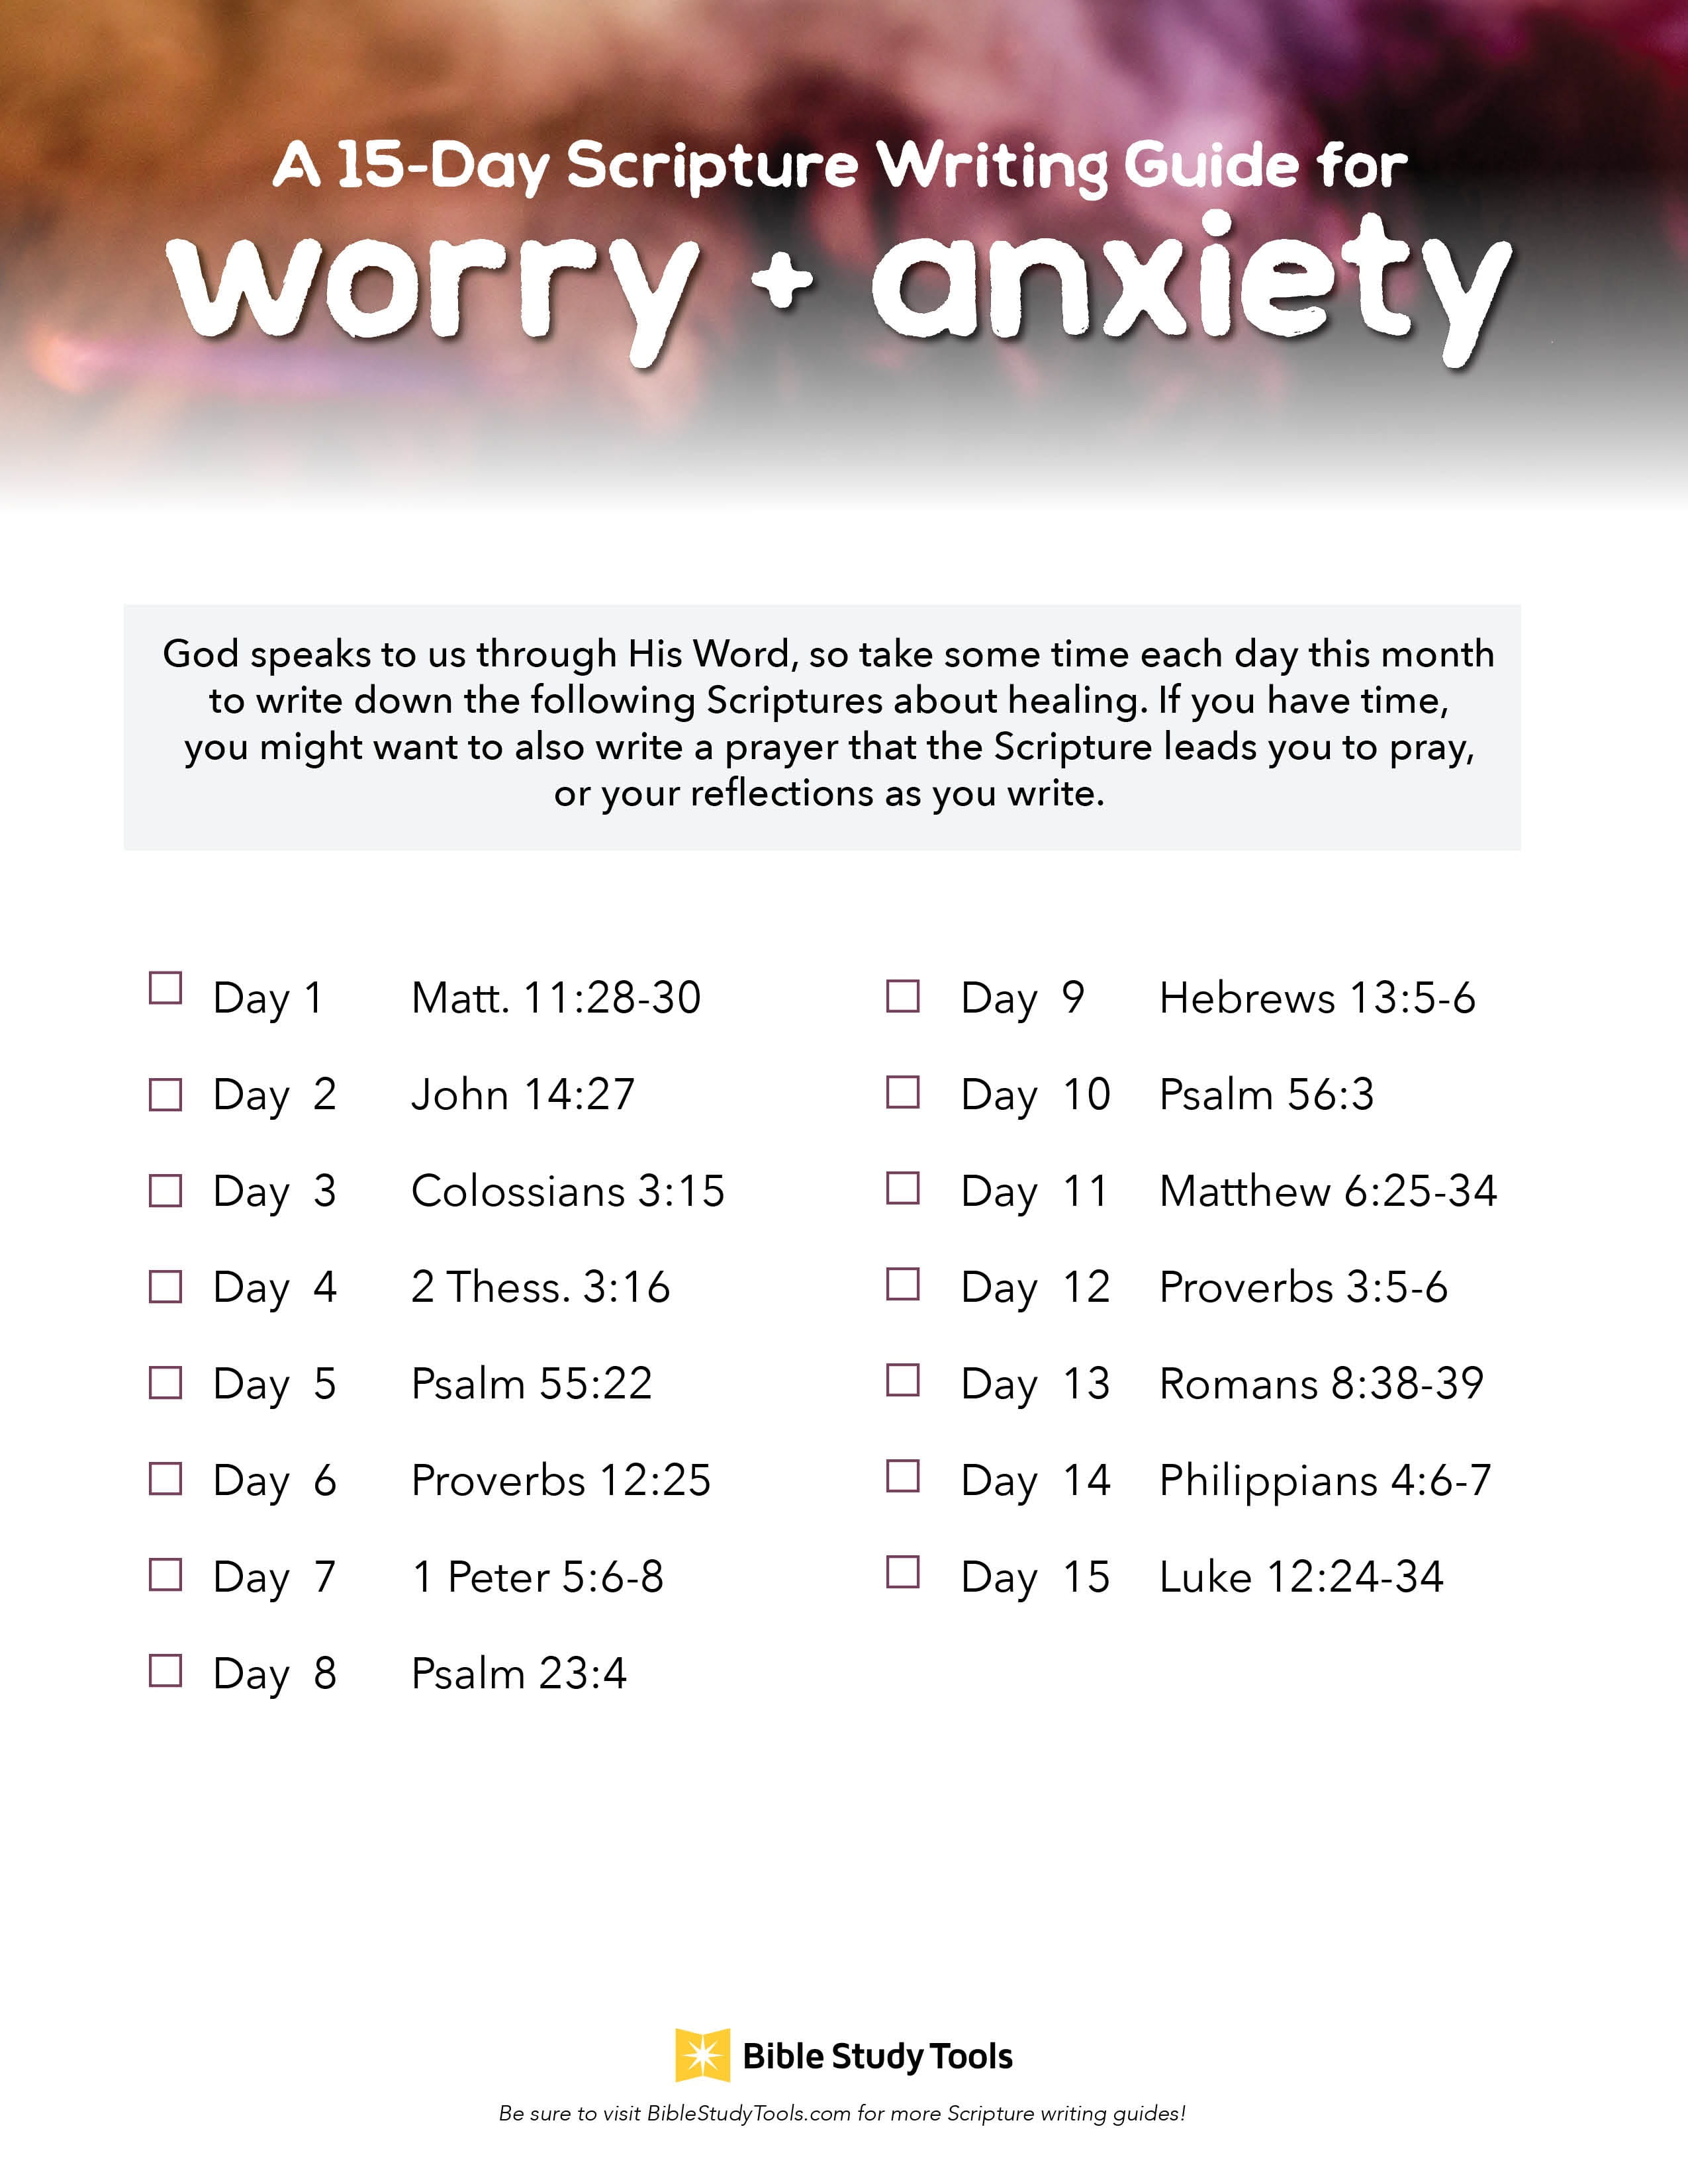 A 18-Day Scripture Writing Guide for Worry and Anxiety - Inside BST